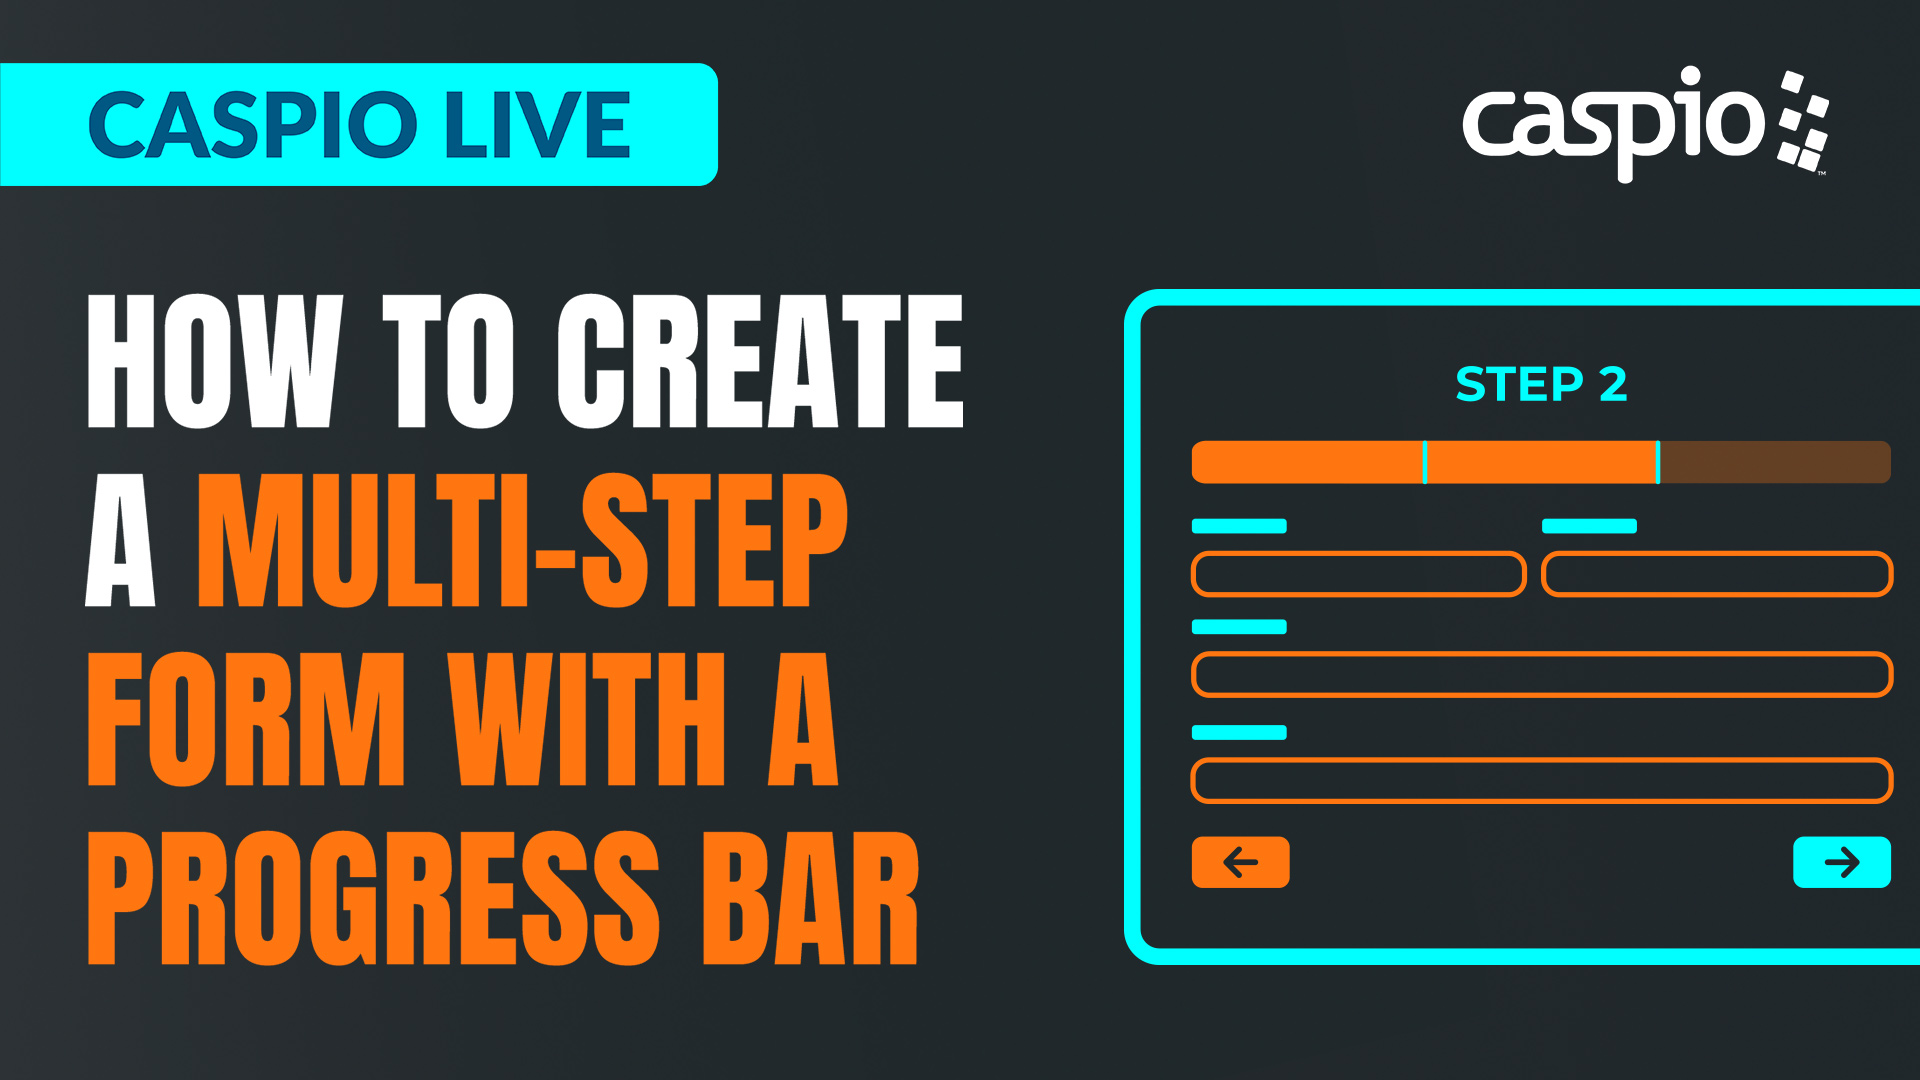 How To Create a Multi-Step Form With a Progress Bar